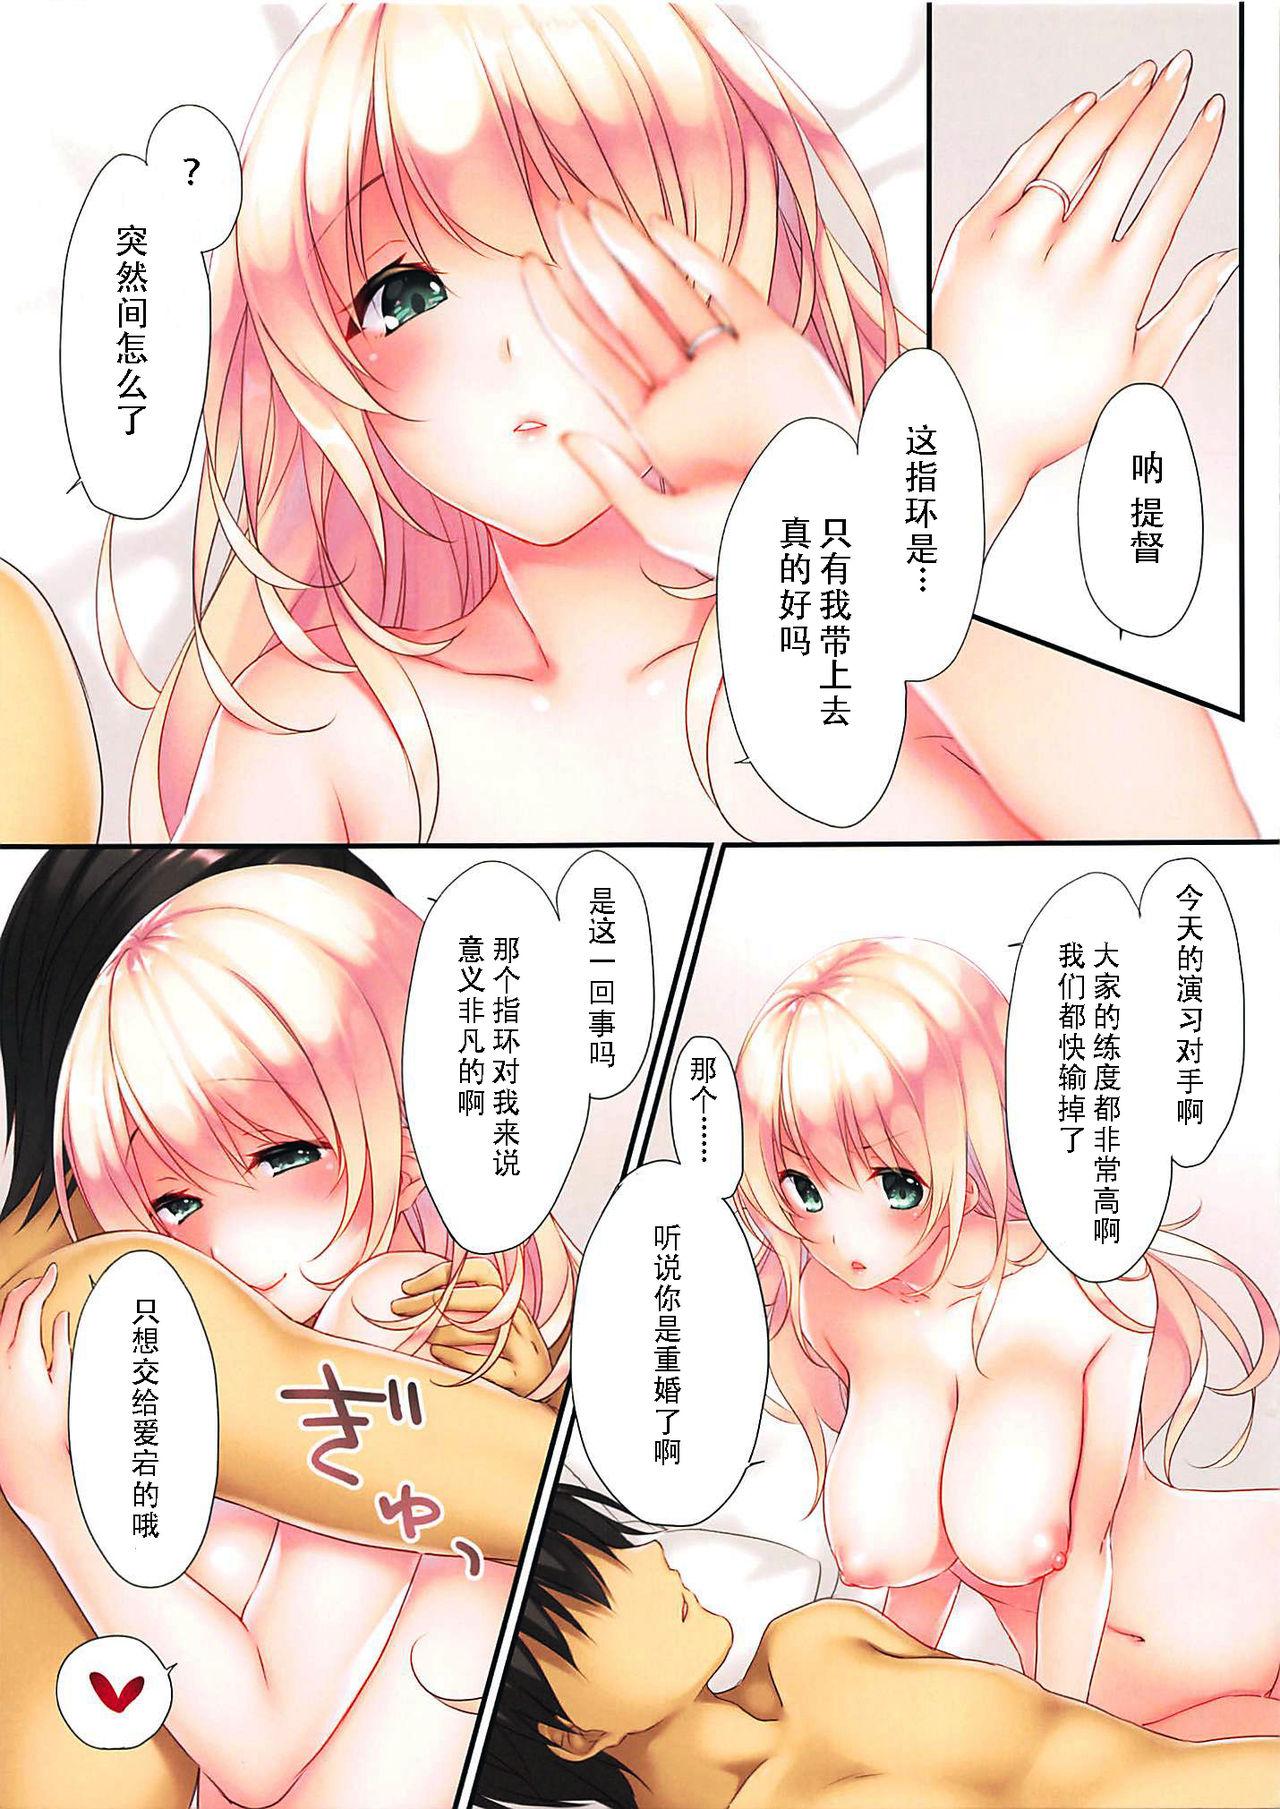 Sex LOVE MARRIAGE - Kantai collection India - Page 4